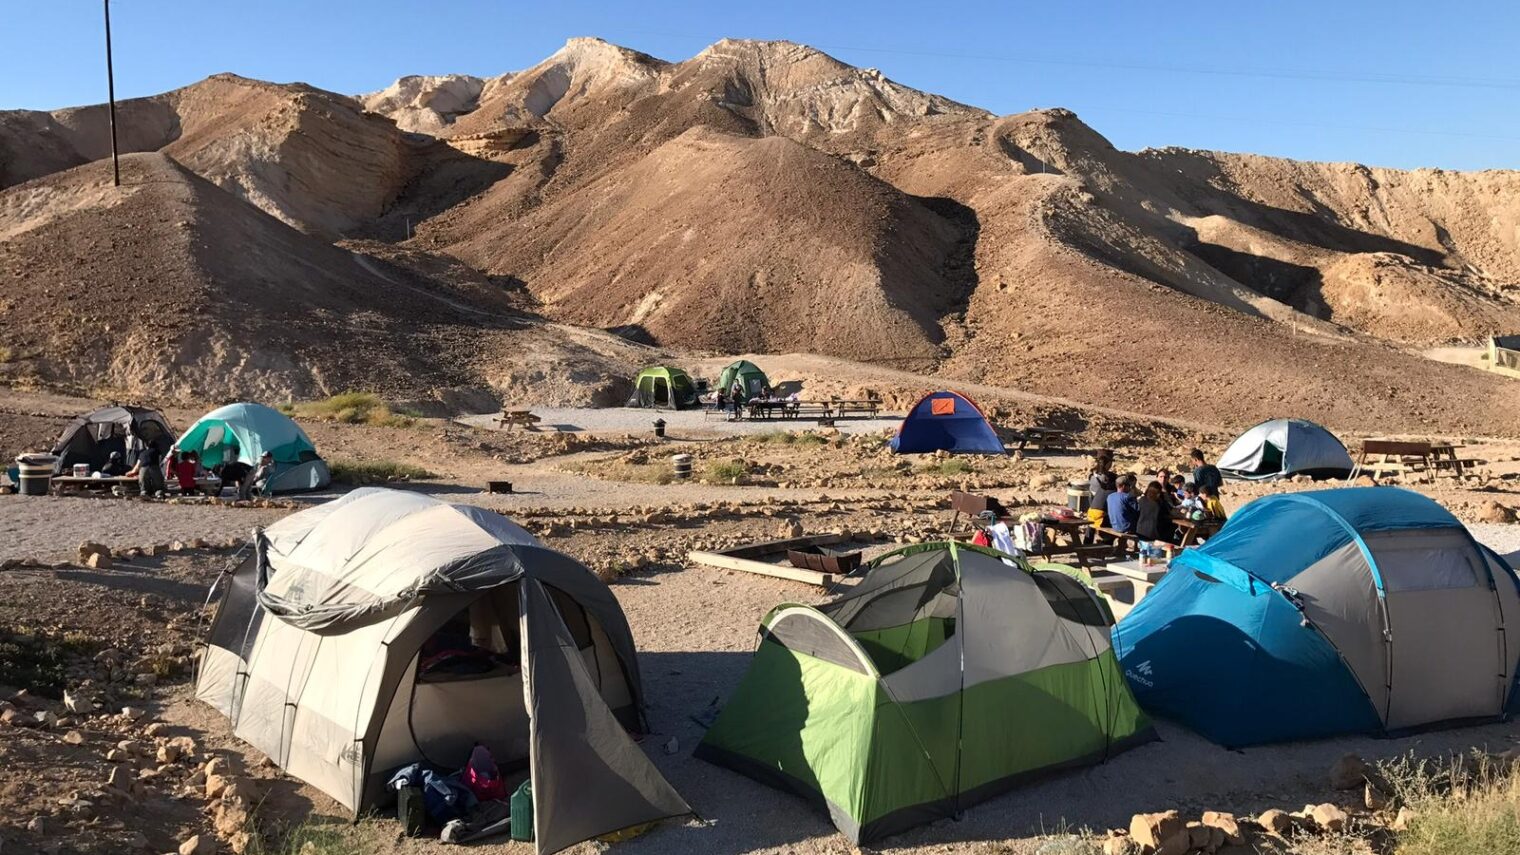 Pitch a tent at the foot of the majestic Masada mountain for a unique Israeli experience. Photo by Limor Katan Friedman/Israel Nature and Parks Authority